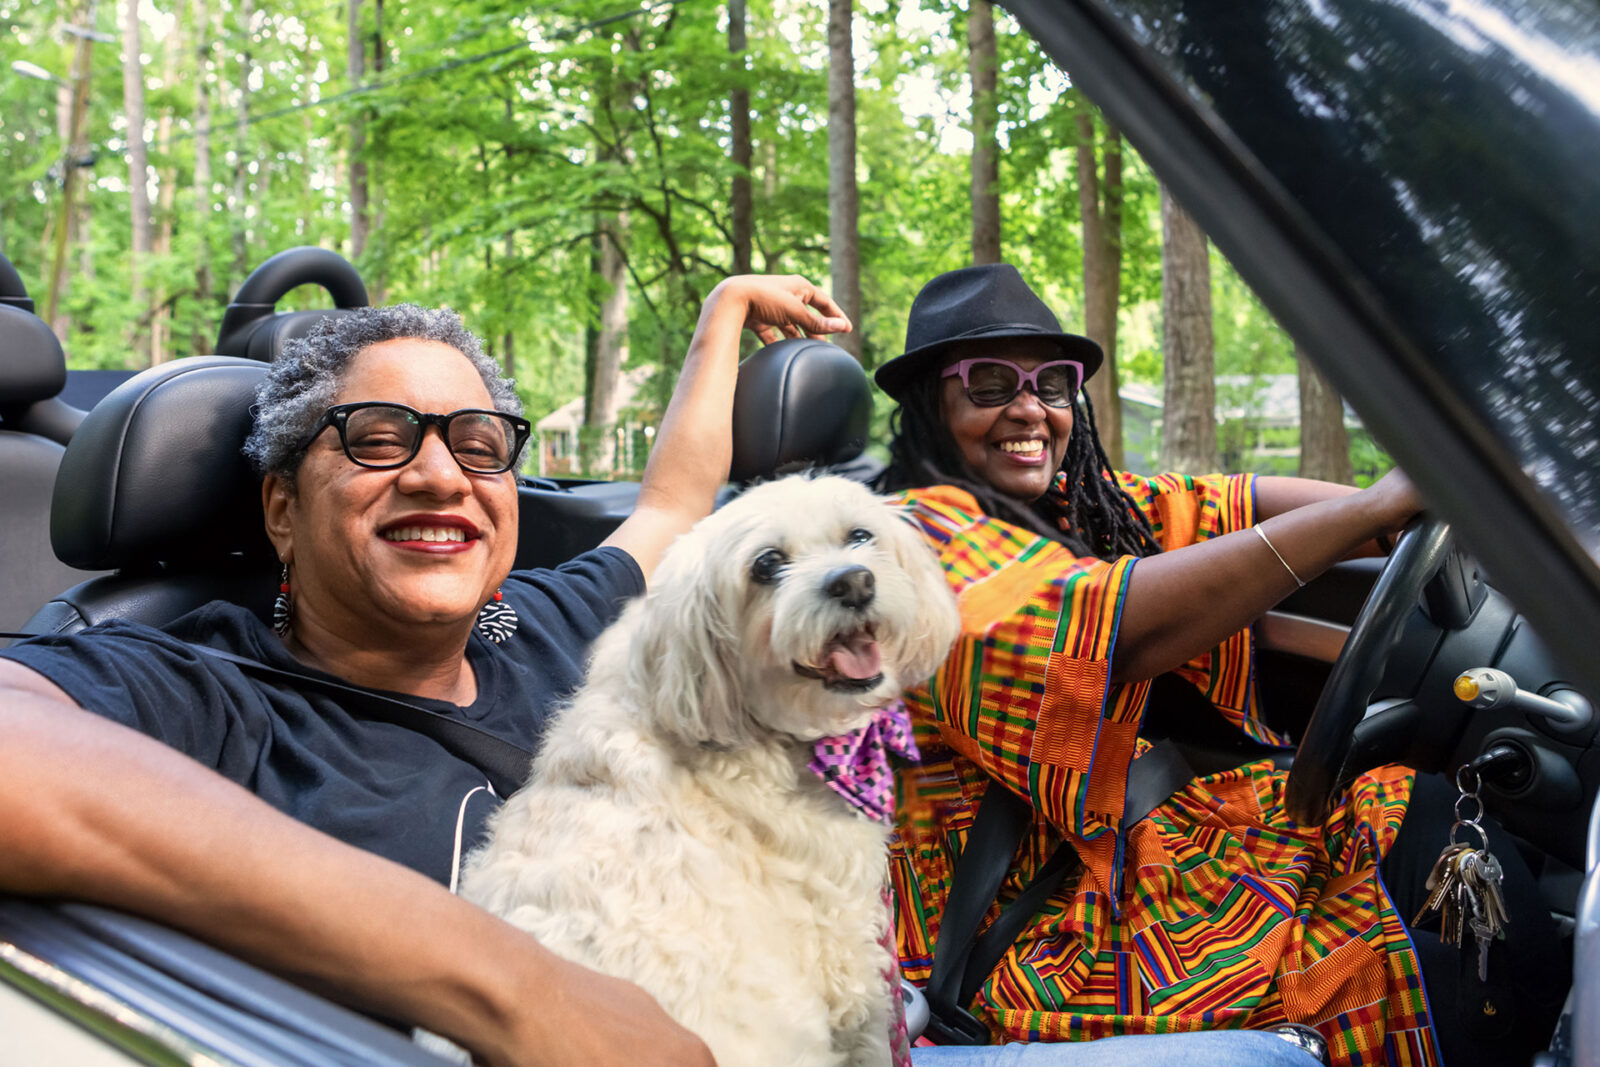 Women in convertible car with dog on lap